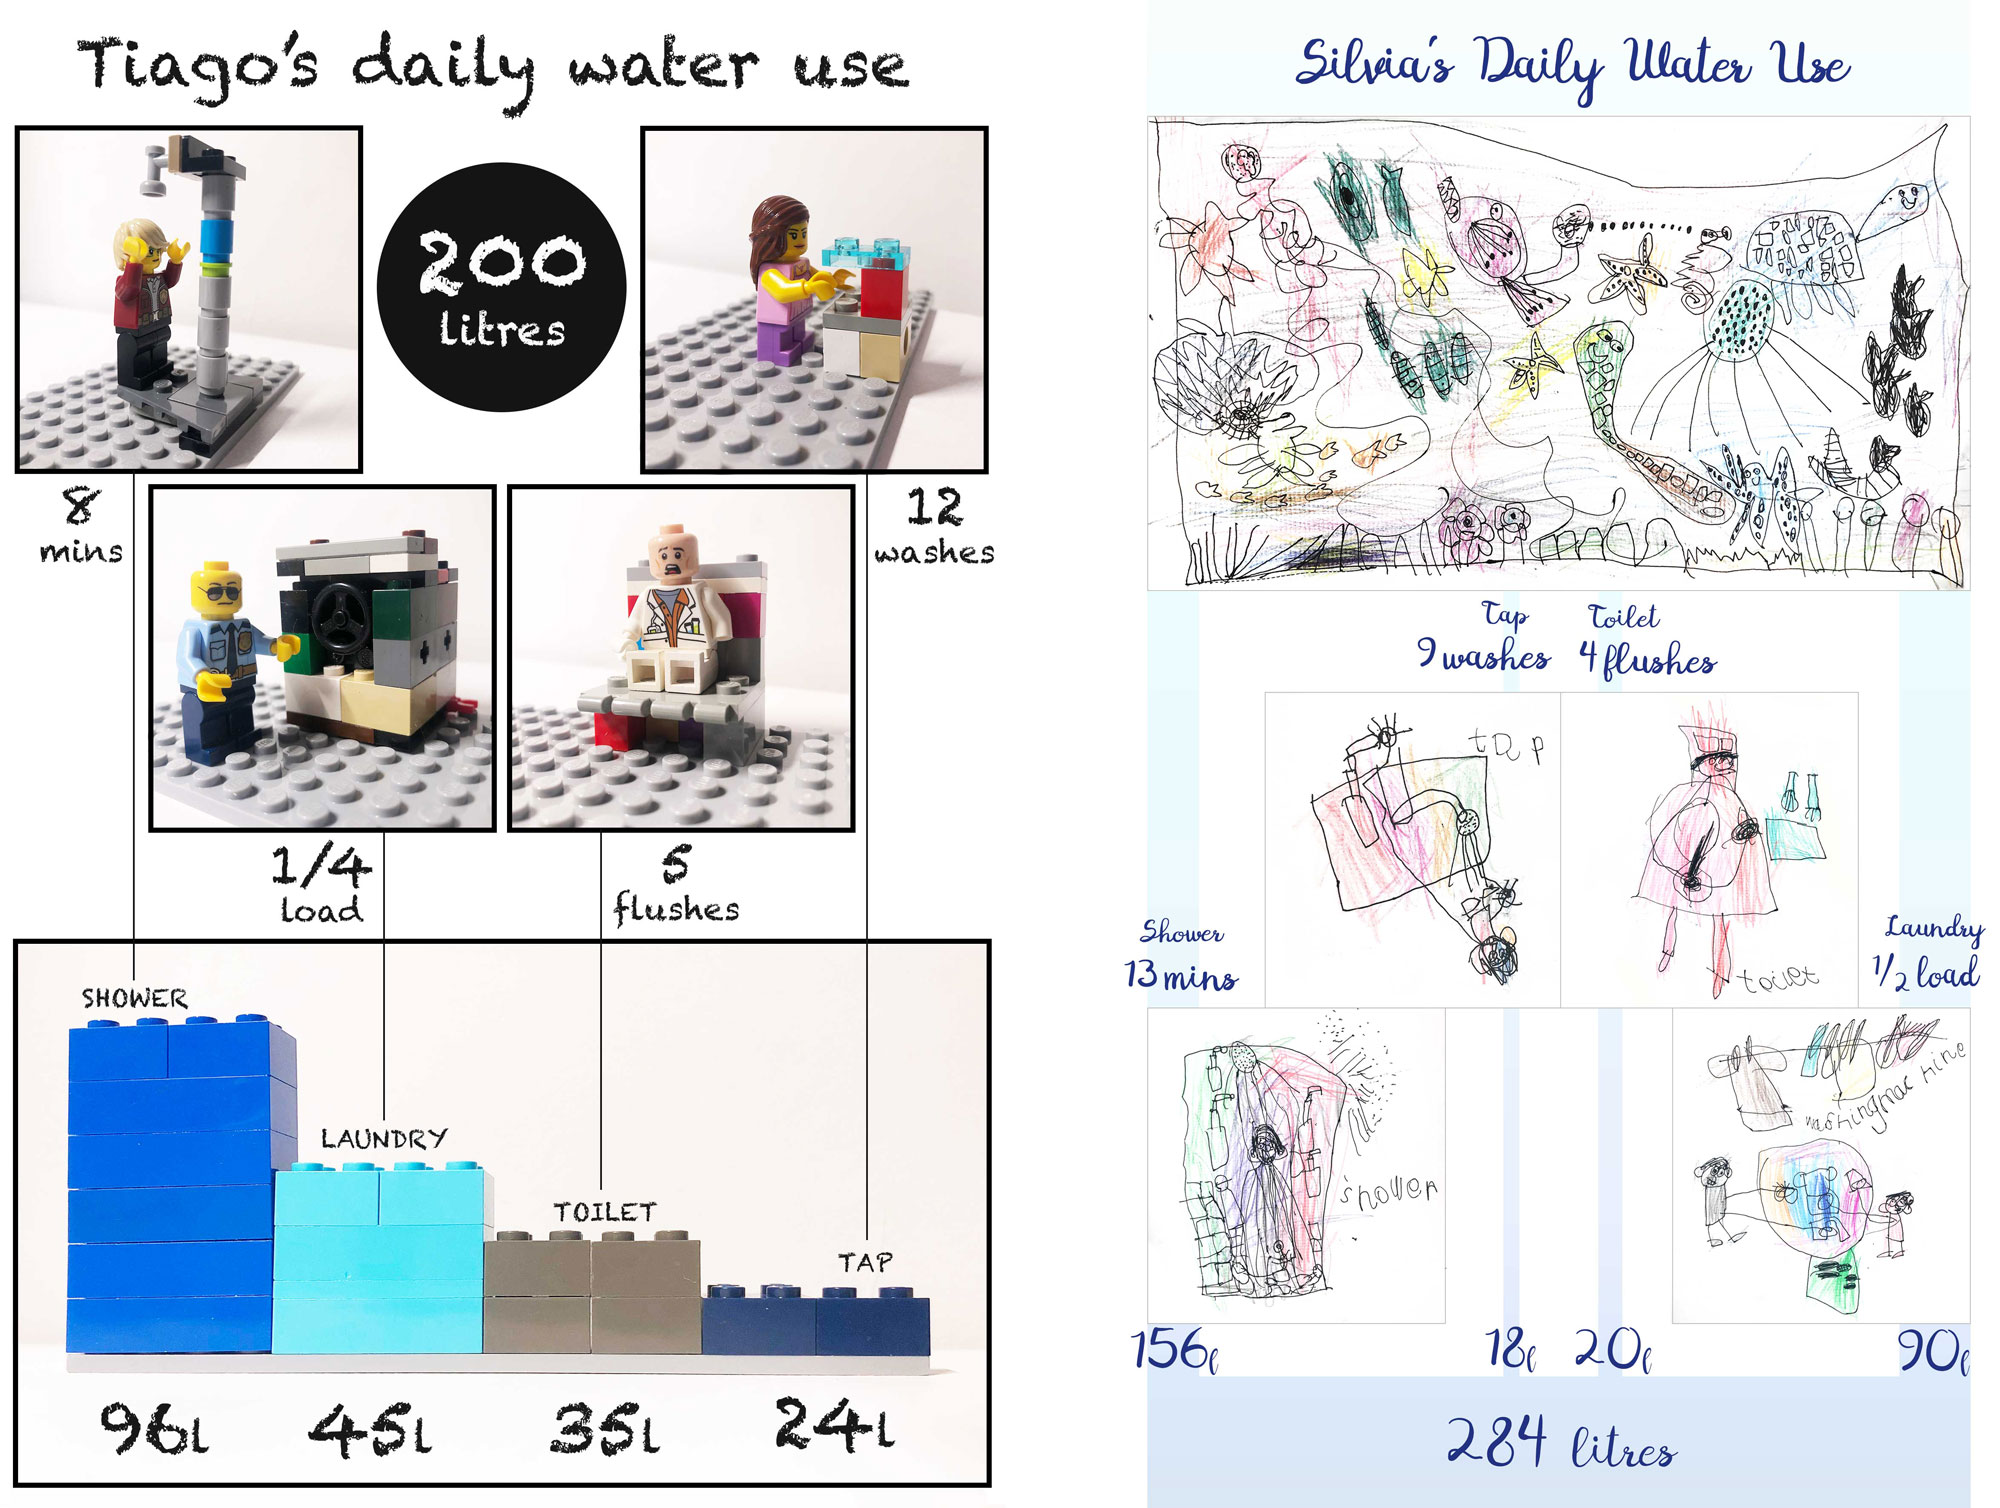 left:collage of lego people with constructed props made with lego, taking a shower, washing hands, with a washing machine, sitting on the toliet, with blocks of lego as bar charts with data annotation, right: collage of kid drawings, underwater scene of ocean creatures with blocks of water made digitally flowing down through other drawings of an open tap with running water, person sitting on a toilet, person showering, two people taking clothes out of waching machine and washing line with clothes above, down to large block of water with data annotation